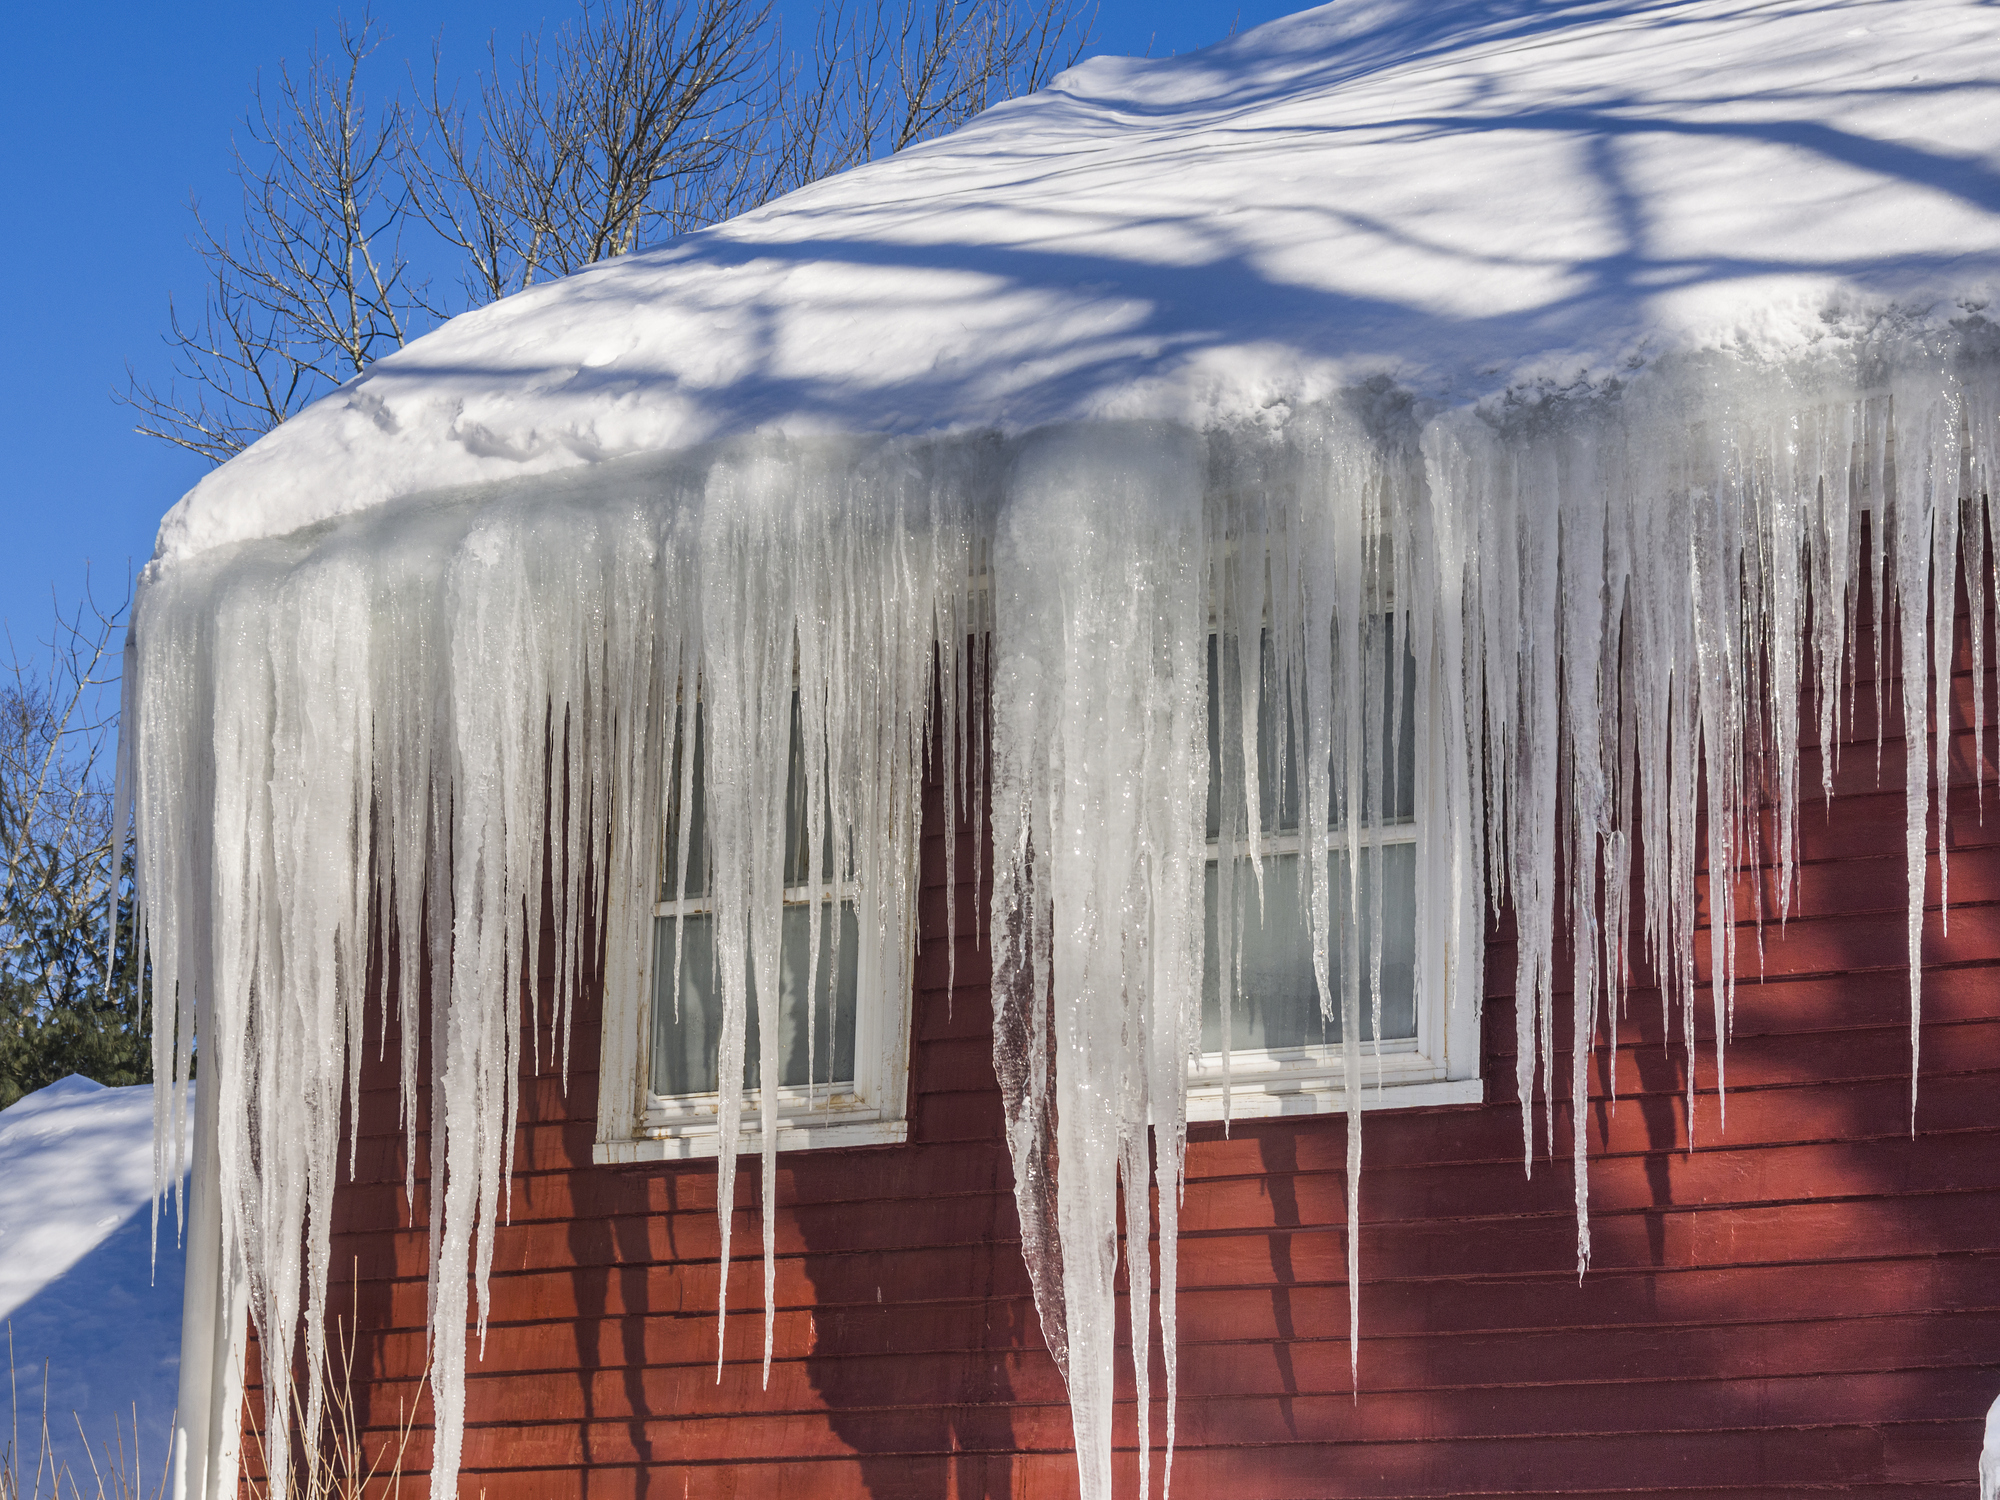 Ice dams and snow on roof